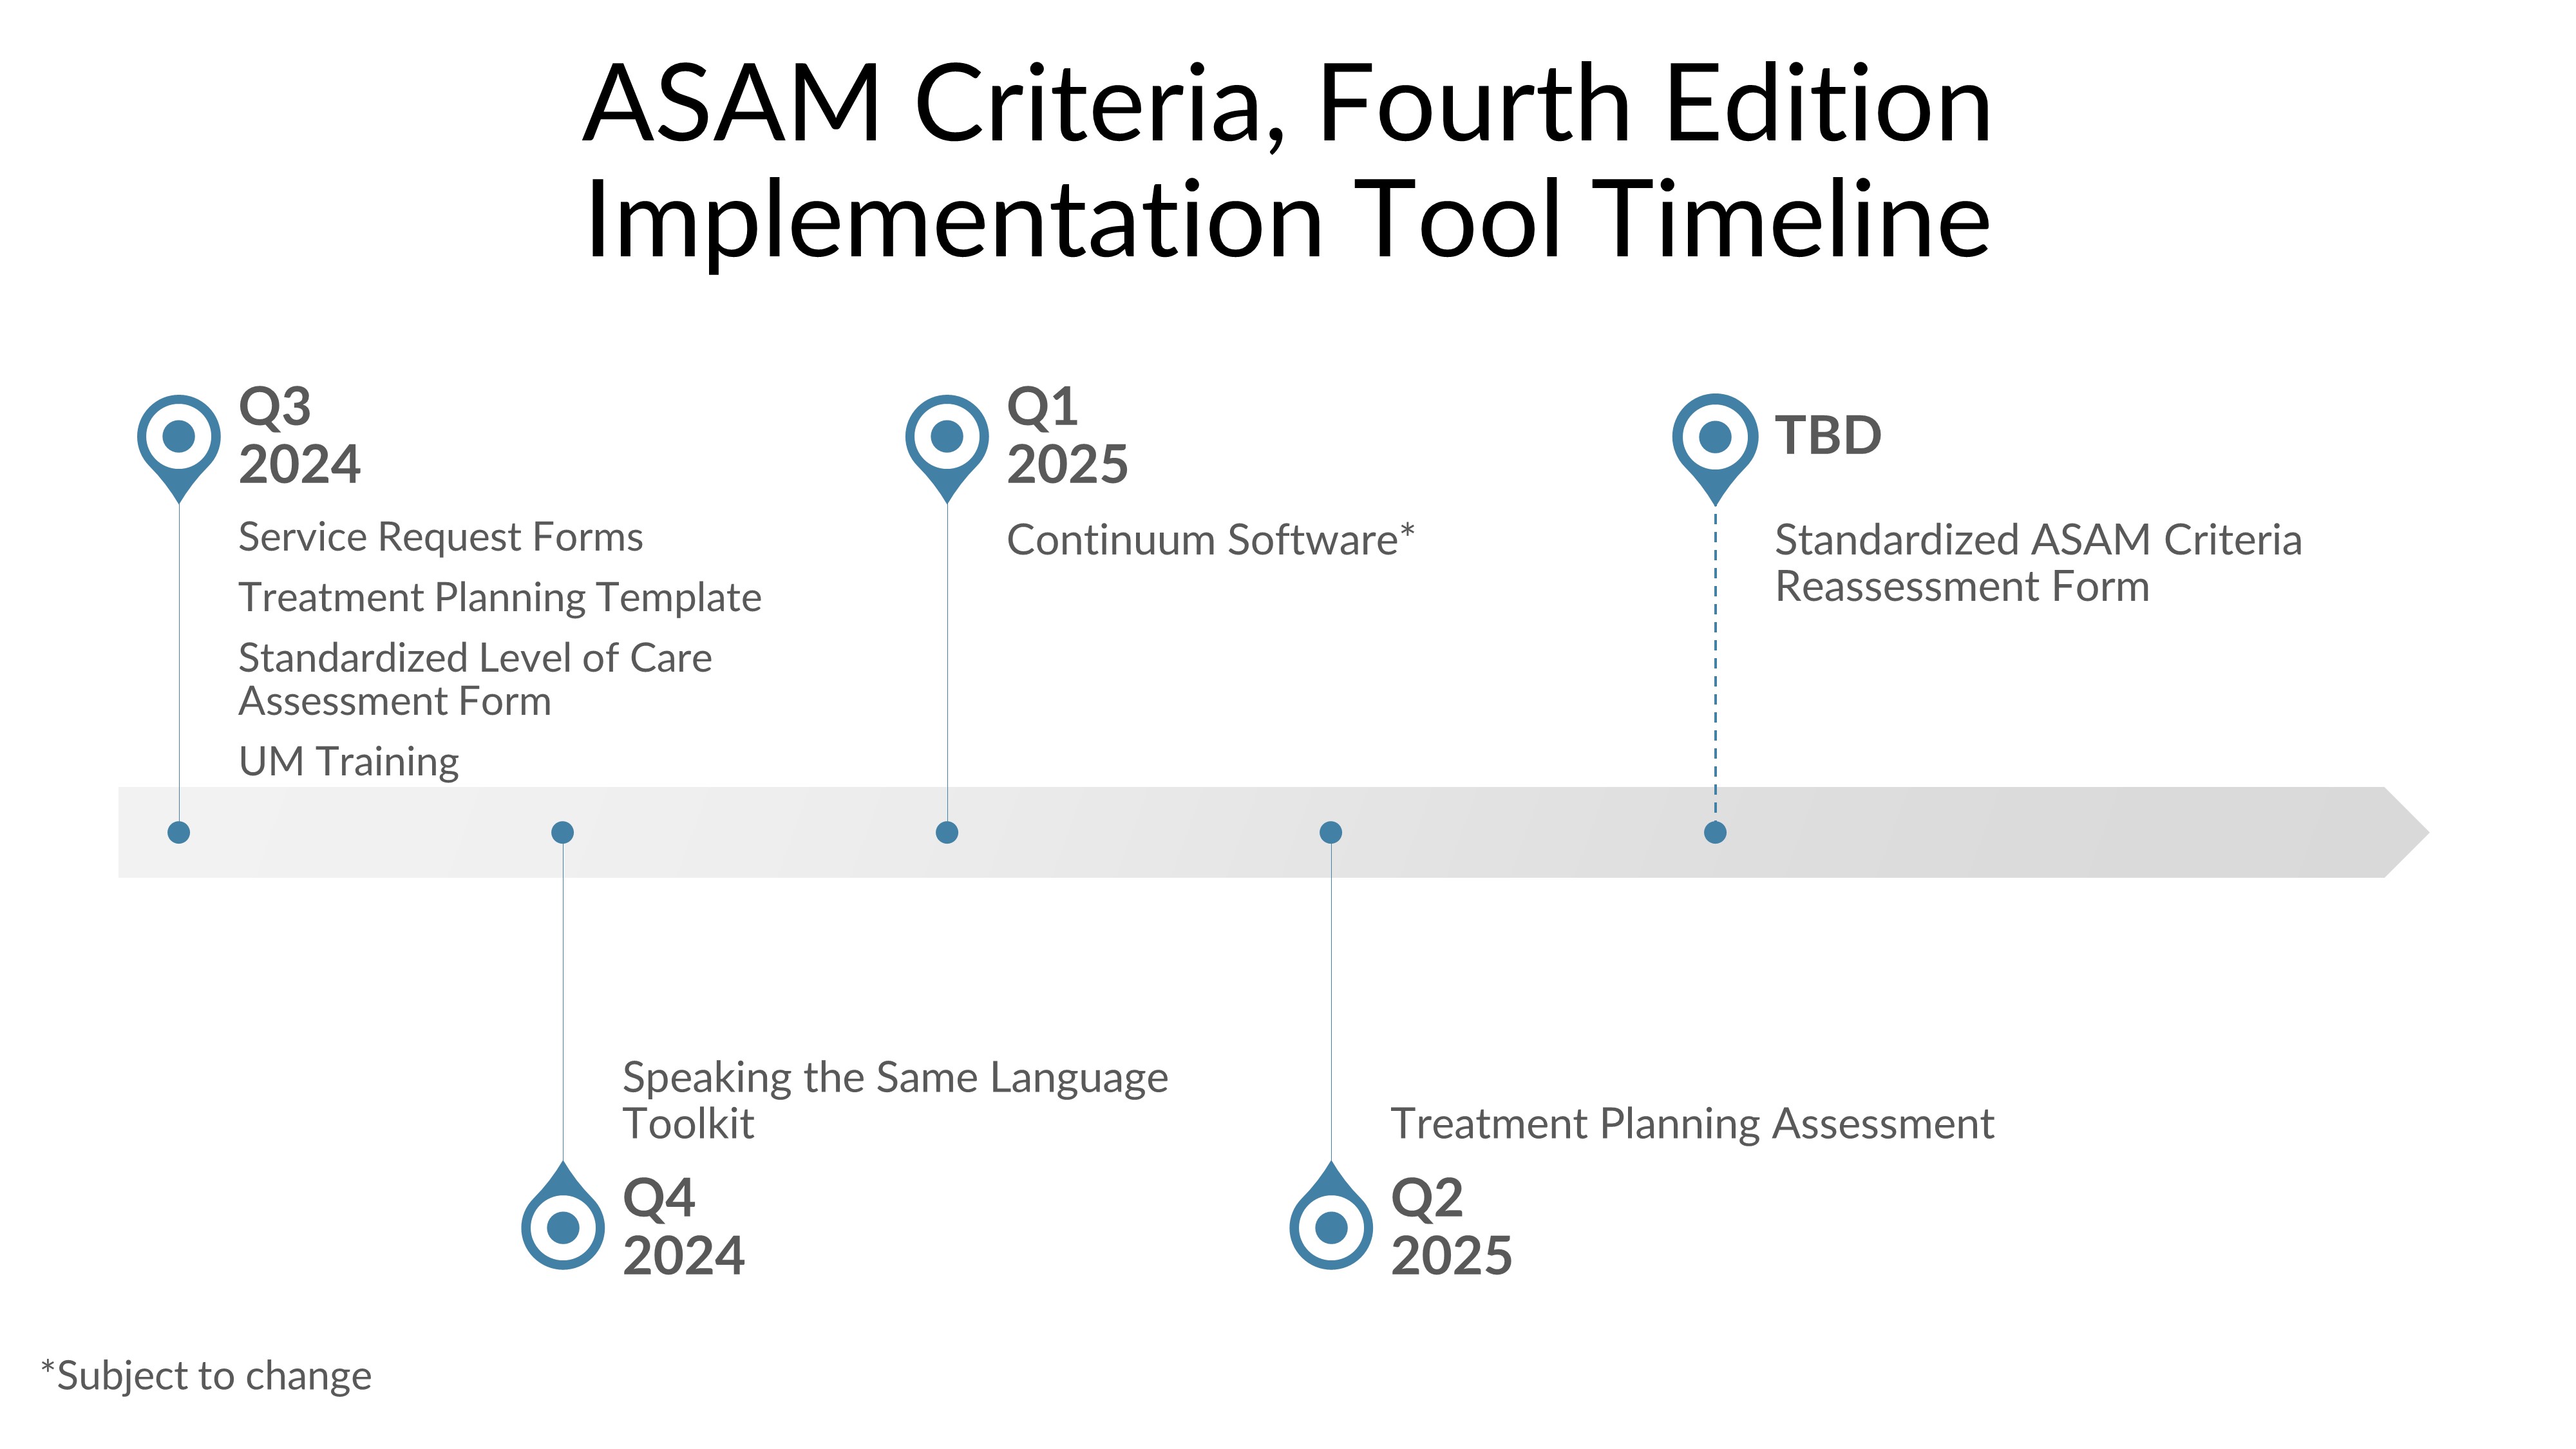 Timeline of implementation tools in development for ASAM Criteria, Fourth Edition.